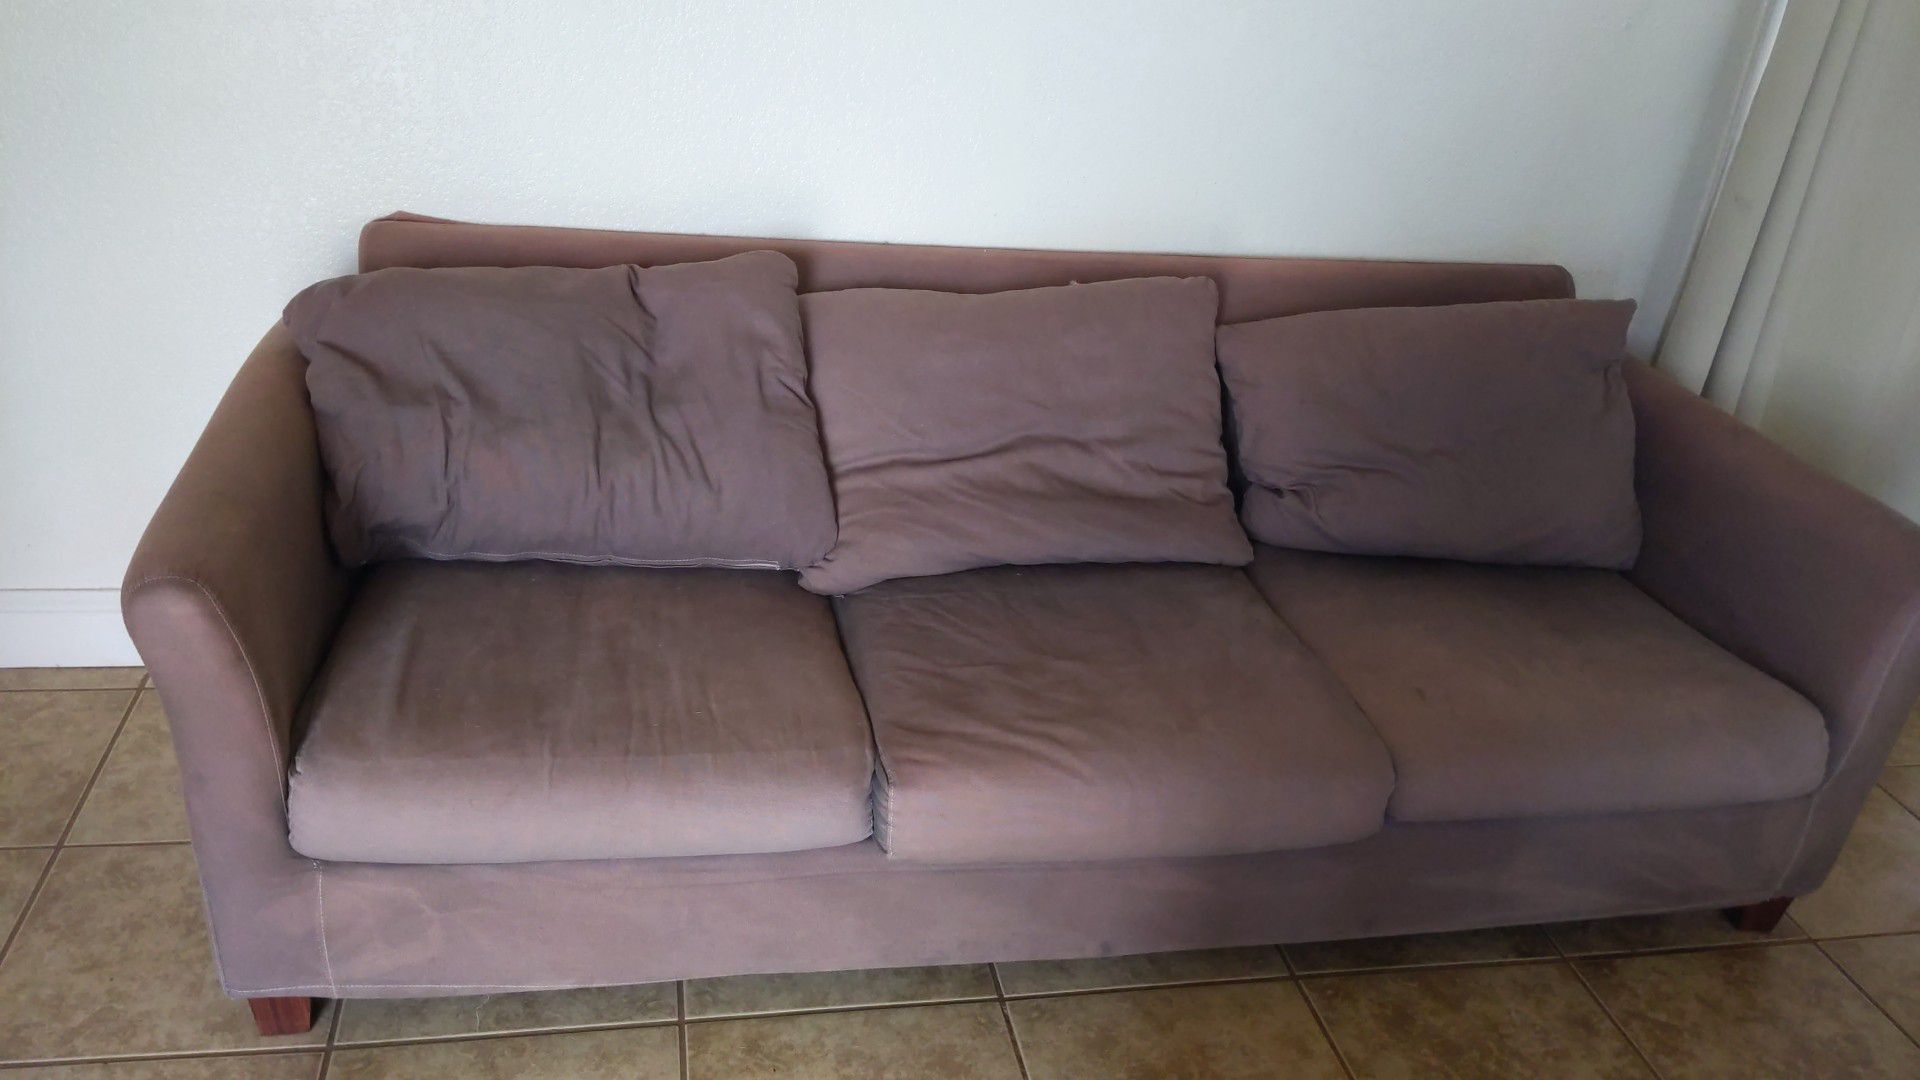 Free couch set